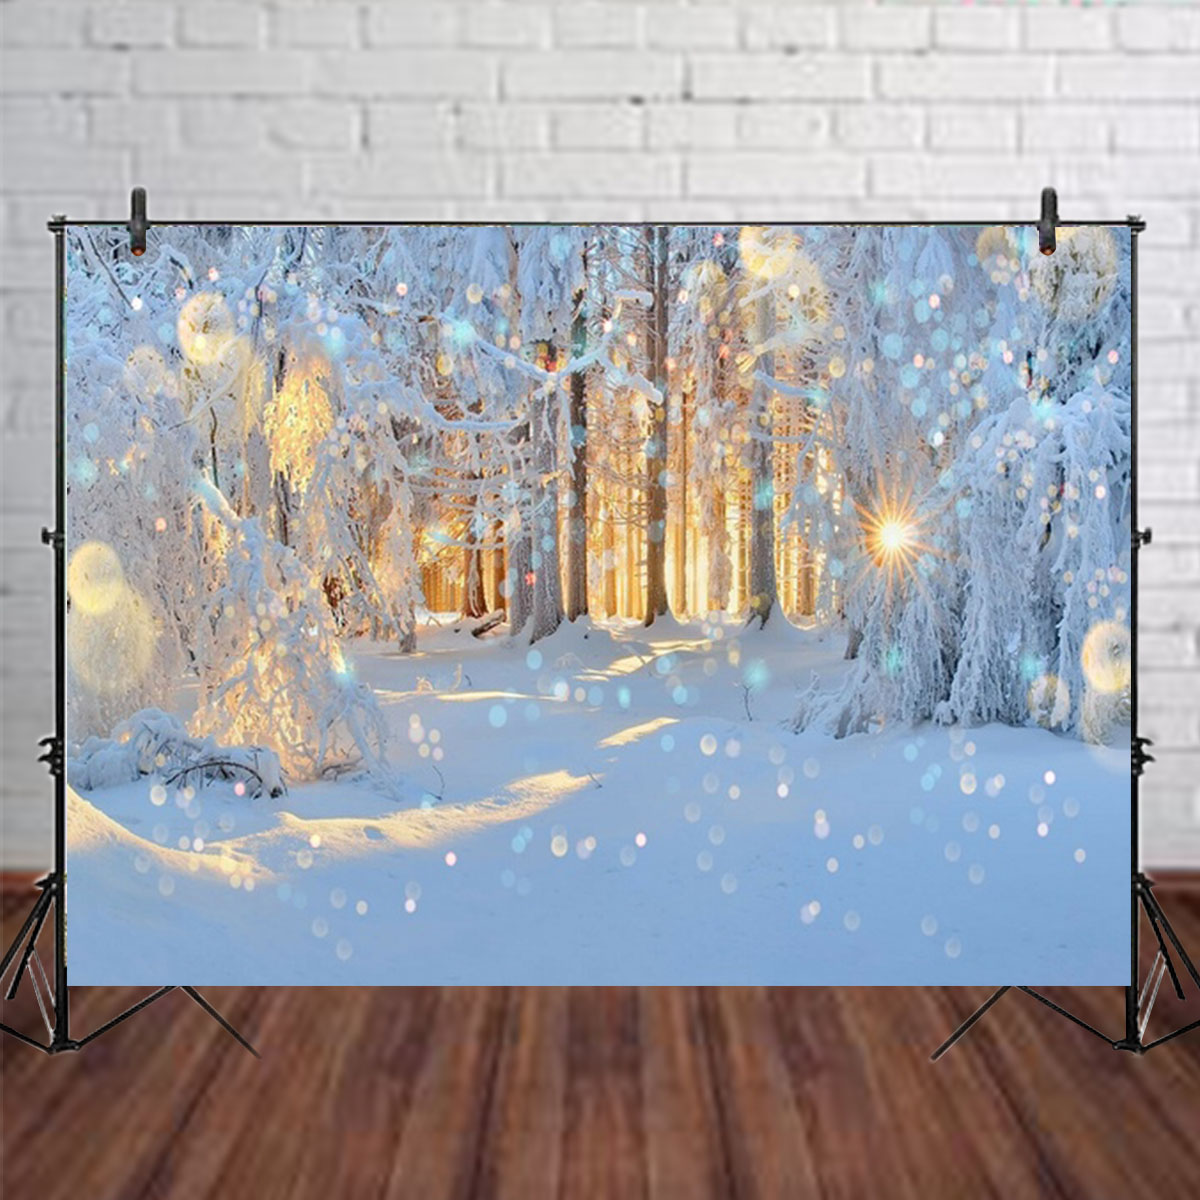 5x3FT-7x5FT-8x6FT-Winter-Snow-Light-Forest-Photography-Backdrop-Background-Studio-Prop-1609473-4